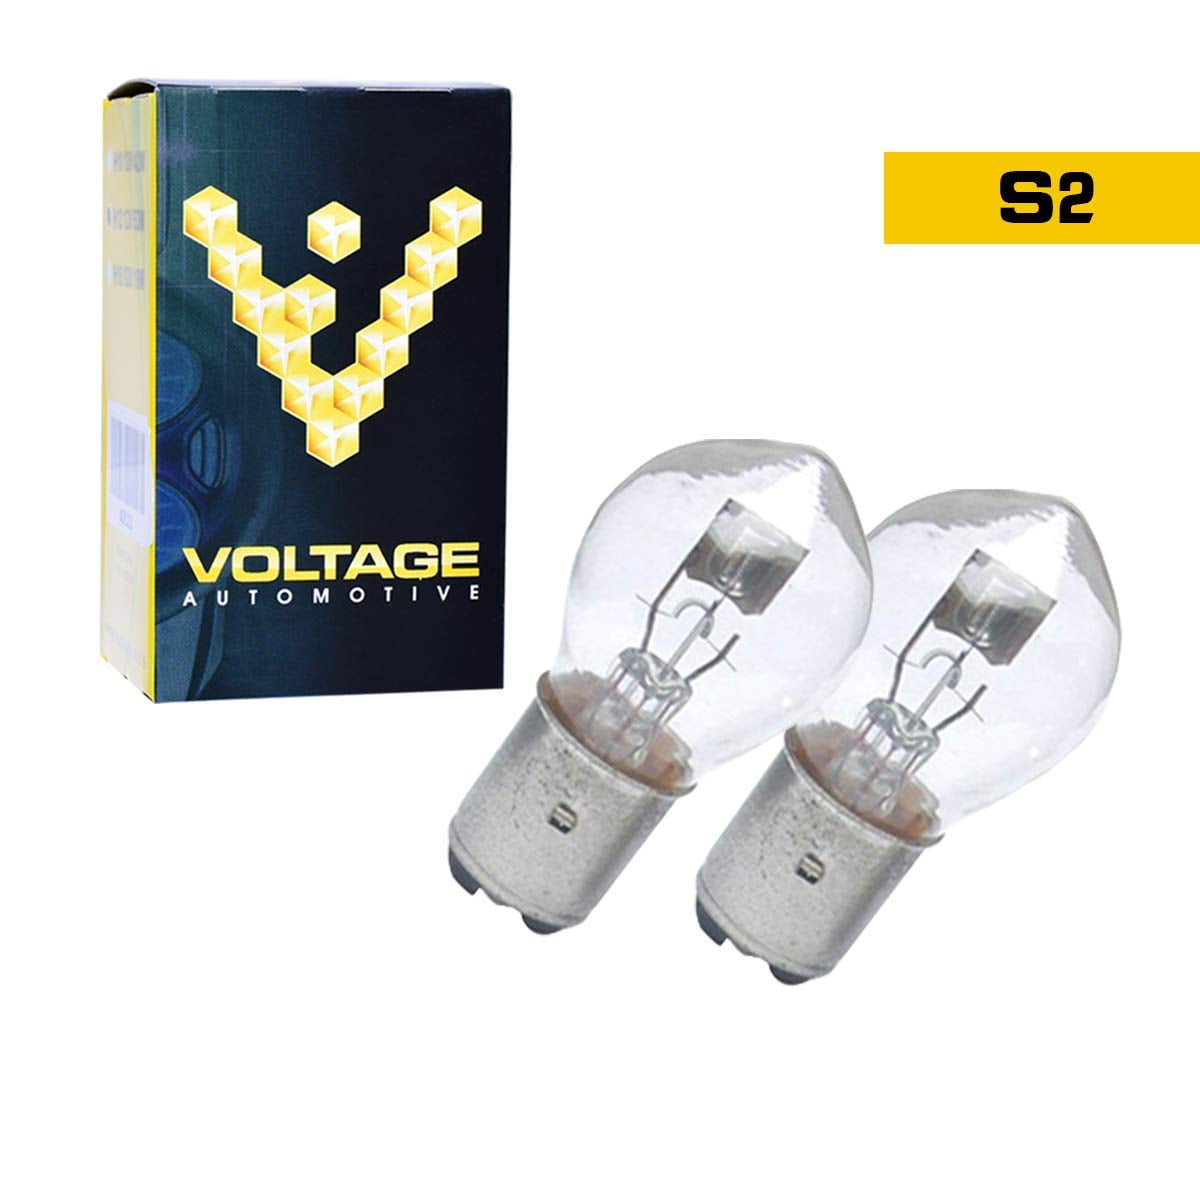 Voltage Automotive S2 B35 12728 38289 Headlight Bulb - For Motorcycle  Scooters Snowmobiles ATVs Tractors,1 Pair 